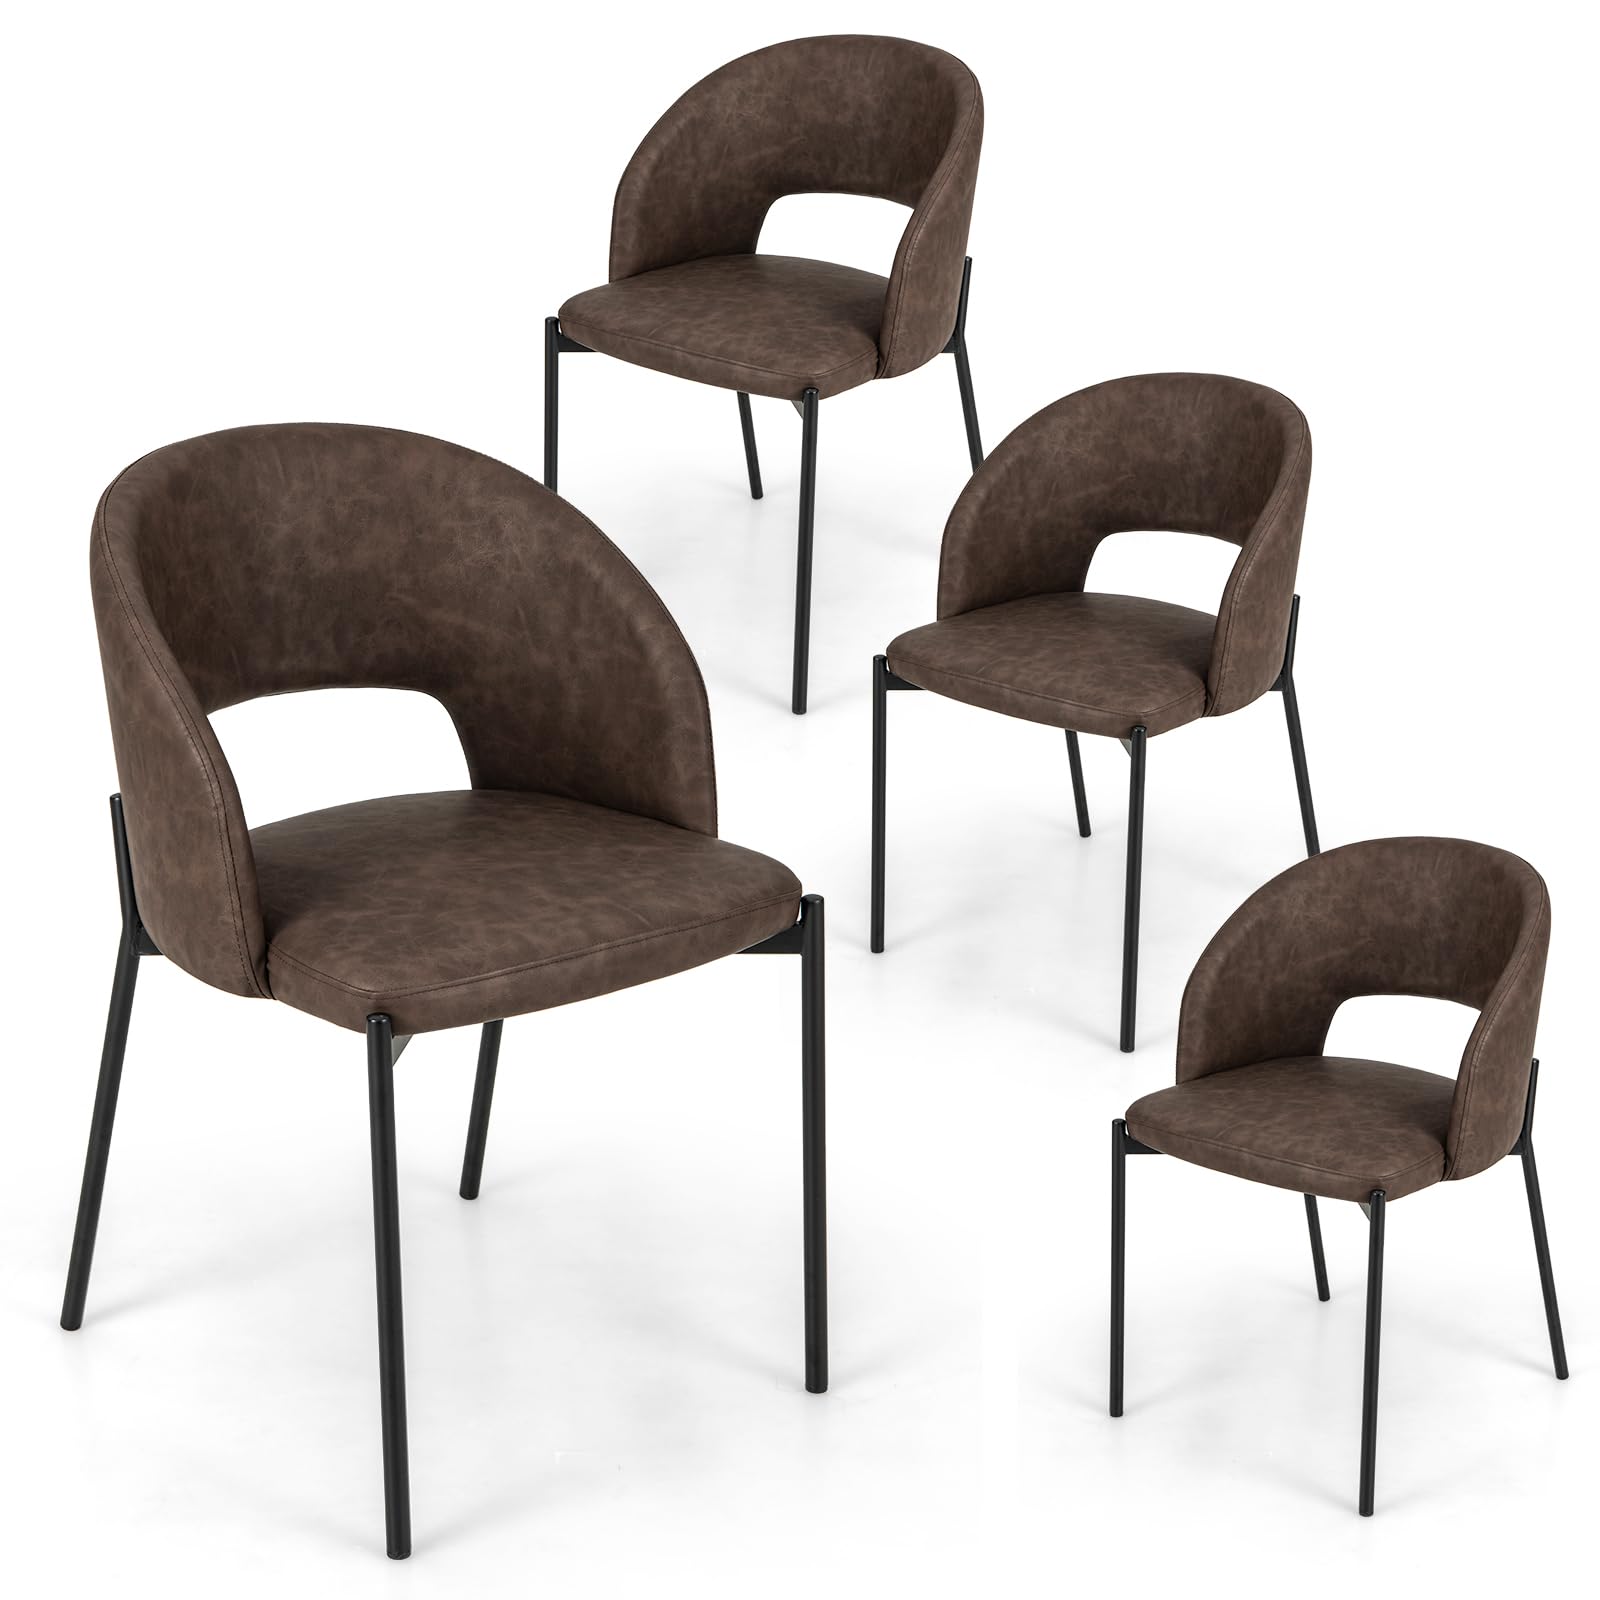 Giantex Dining Chairs, Upholstered Accent Chairs w/High-Density Sponge Cushion